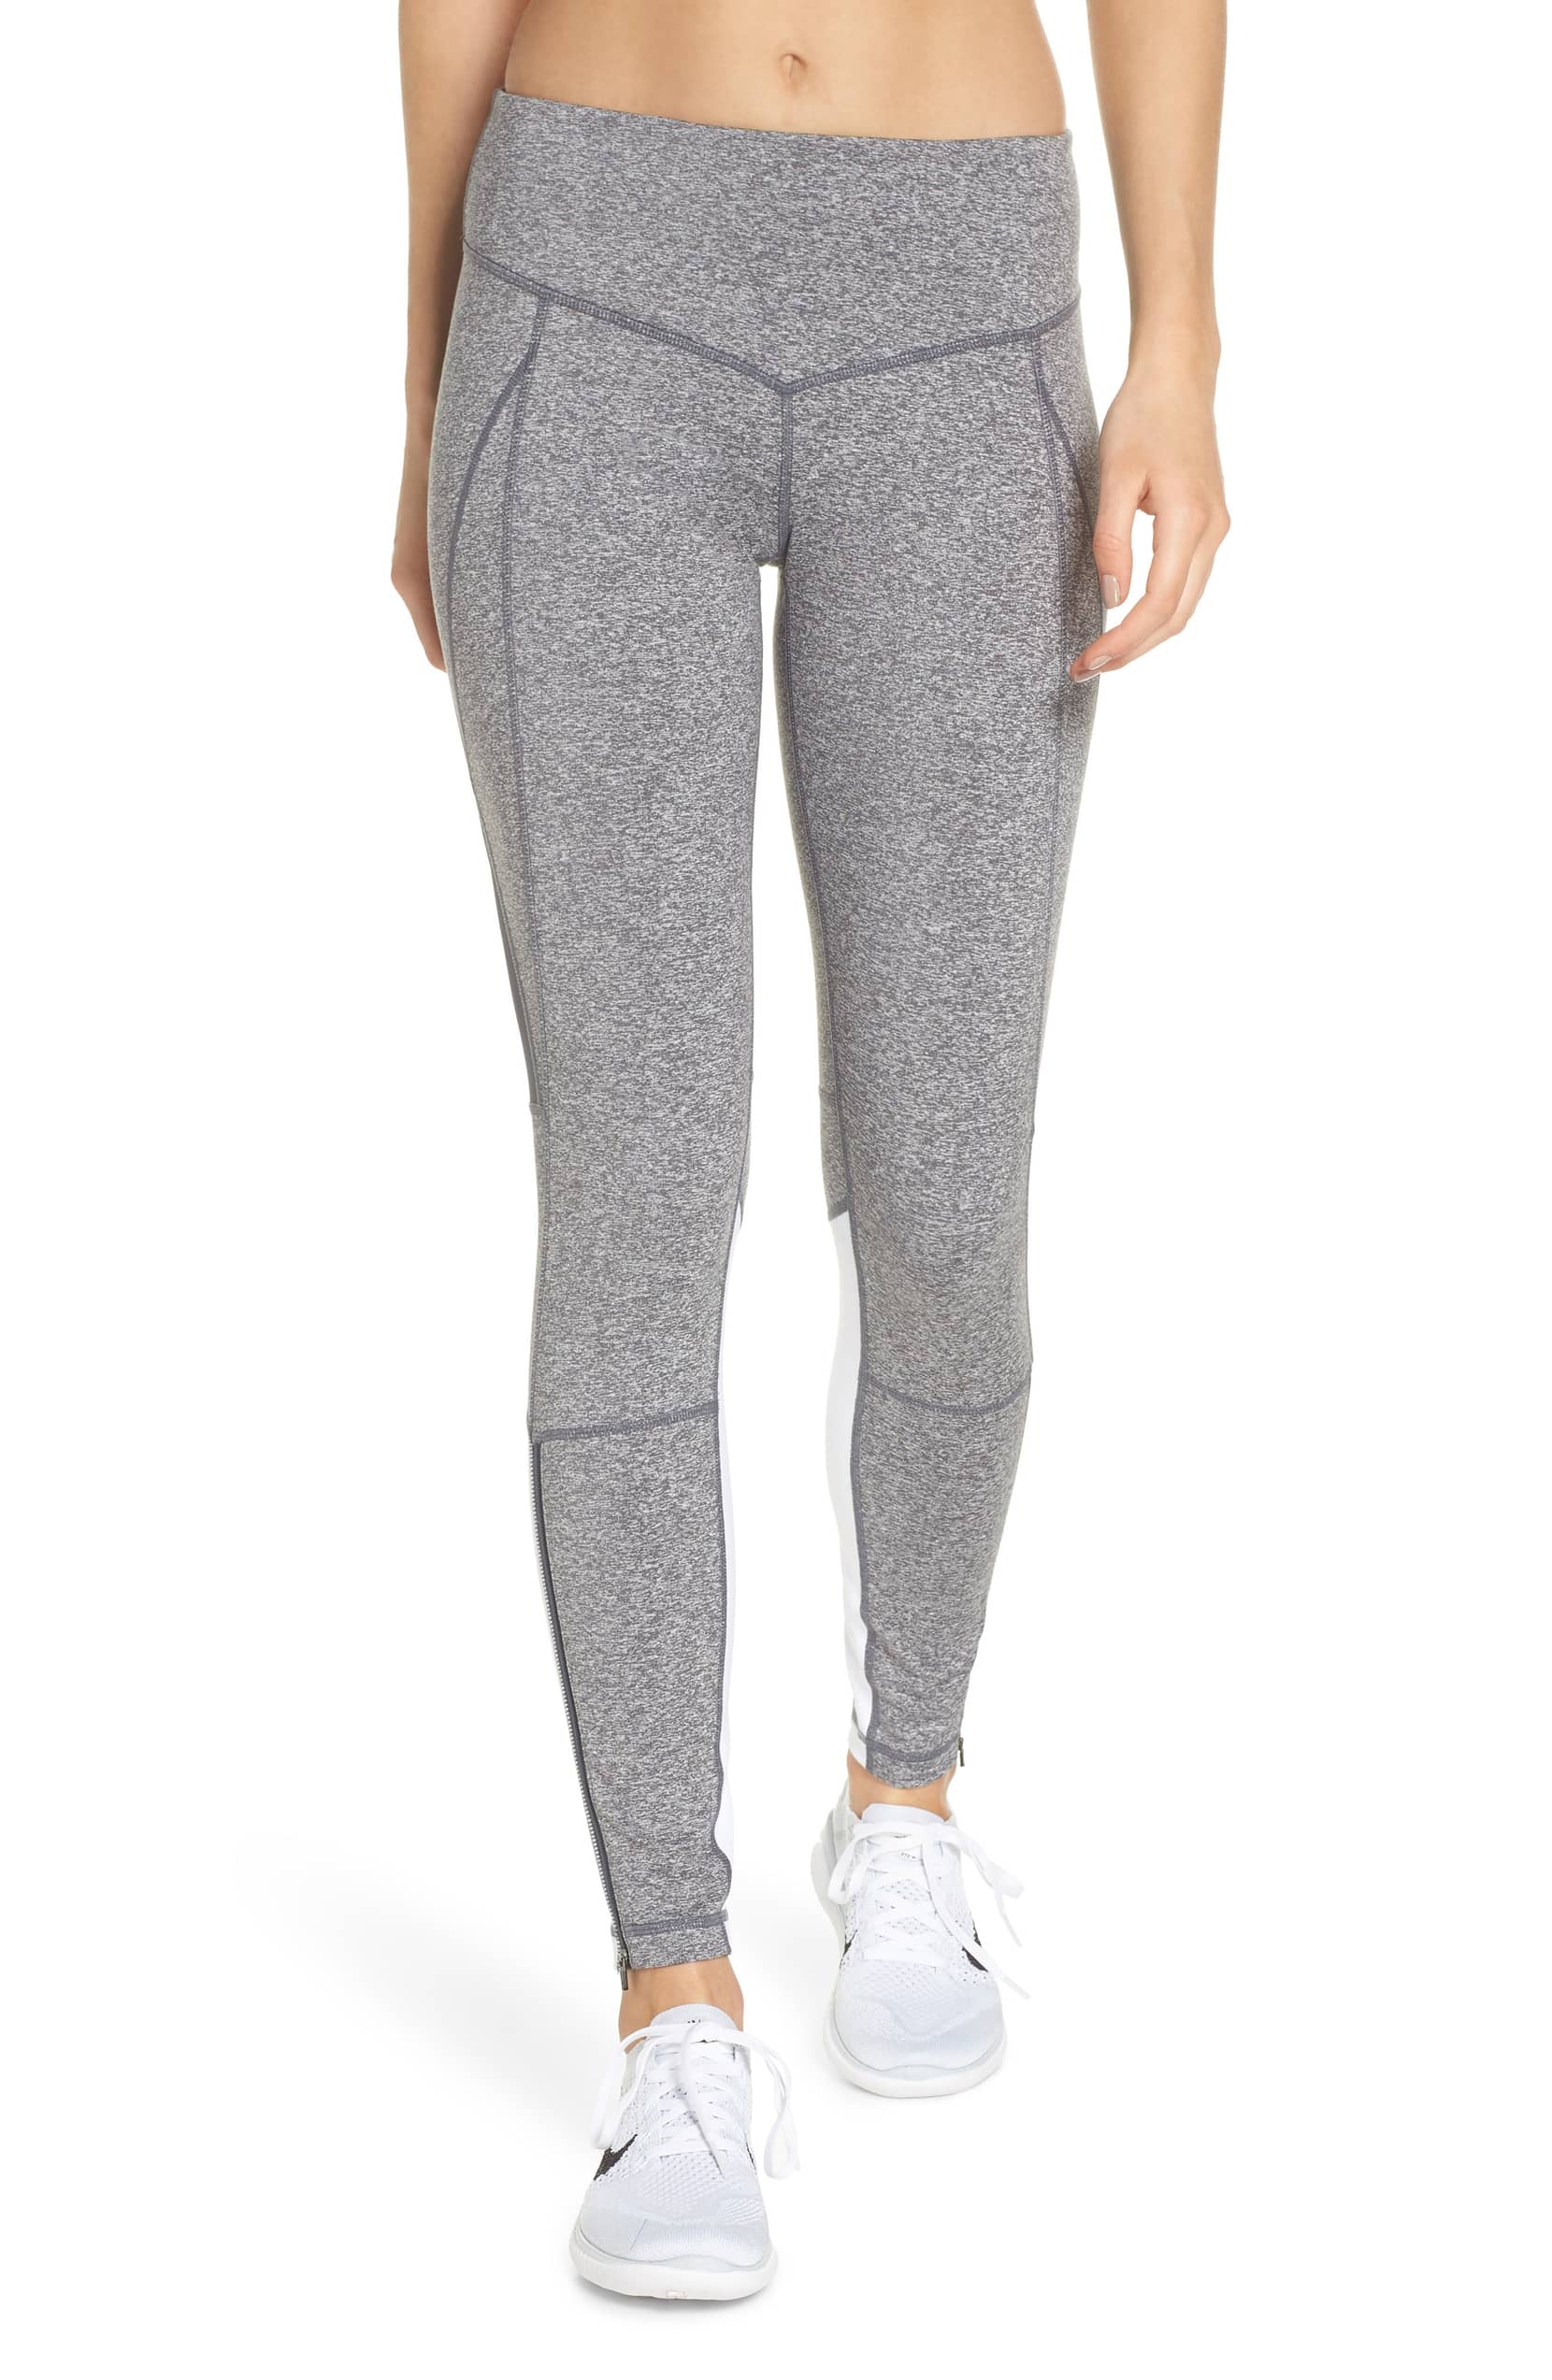 Stay Comfy and Cool in These Zella Leggings on Sale at Nordstrom